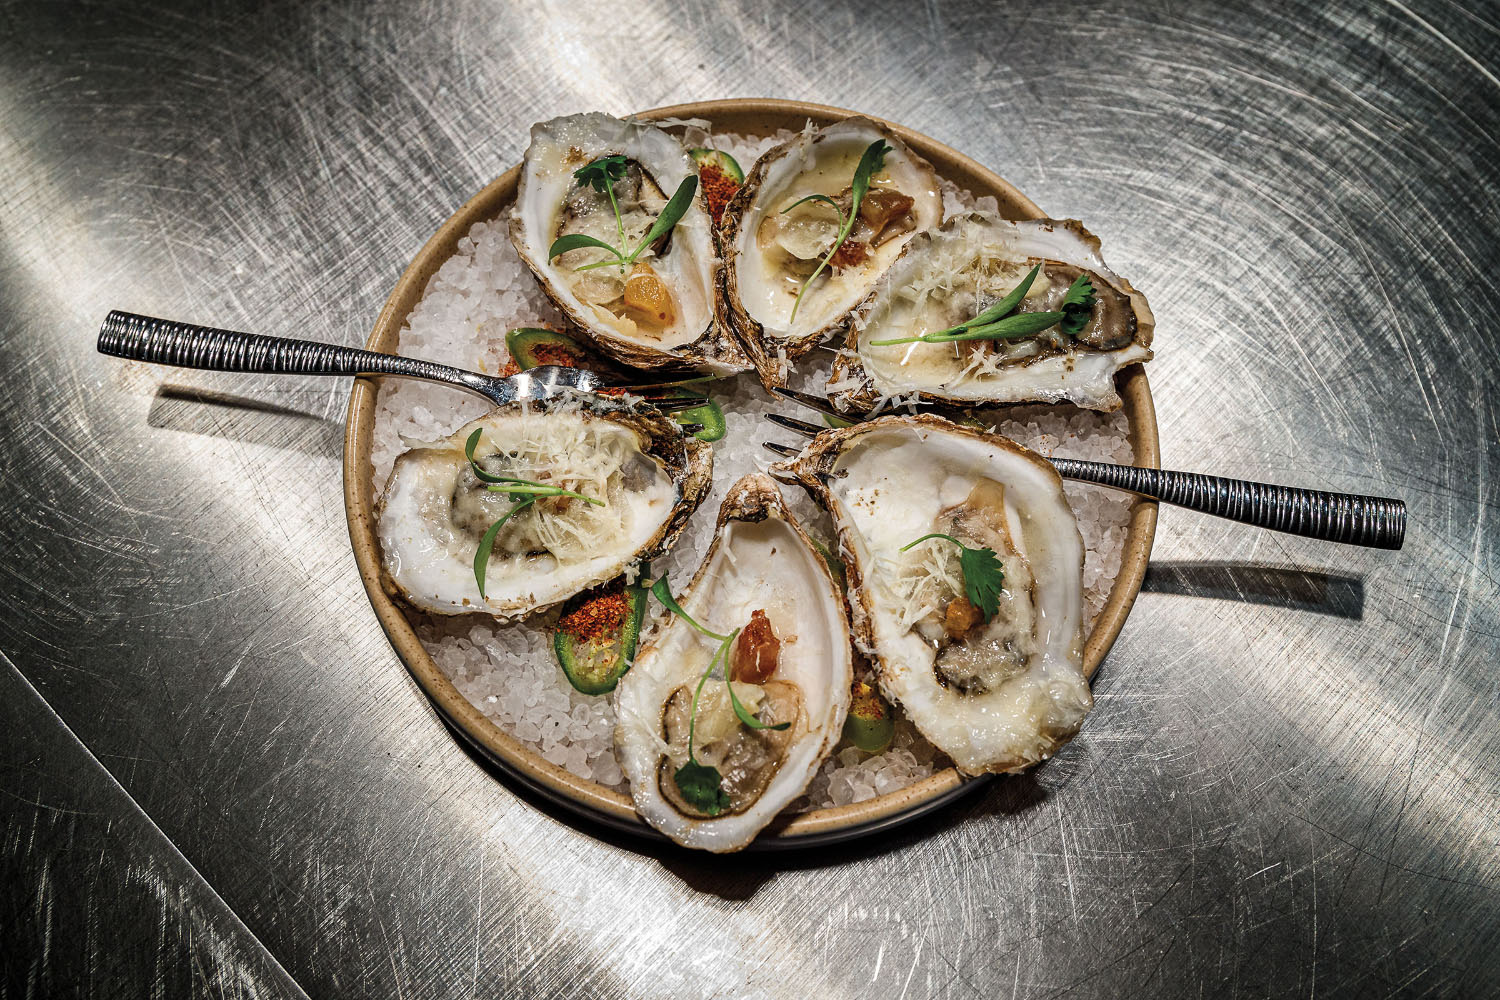 A plate of oysters on top of a stainless steel countertop